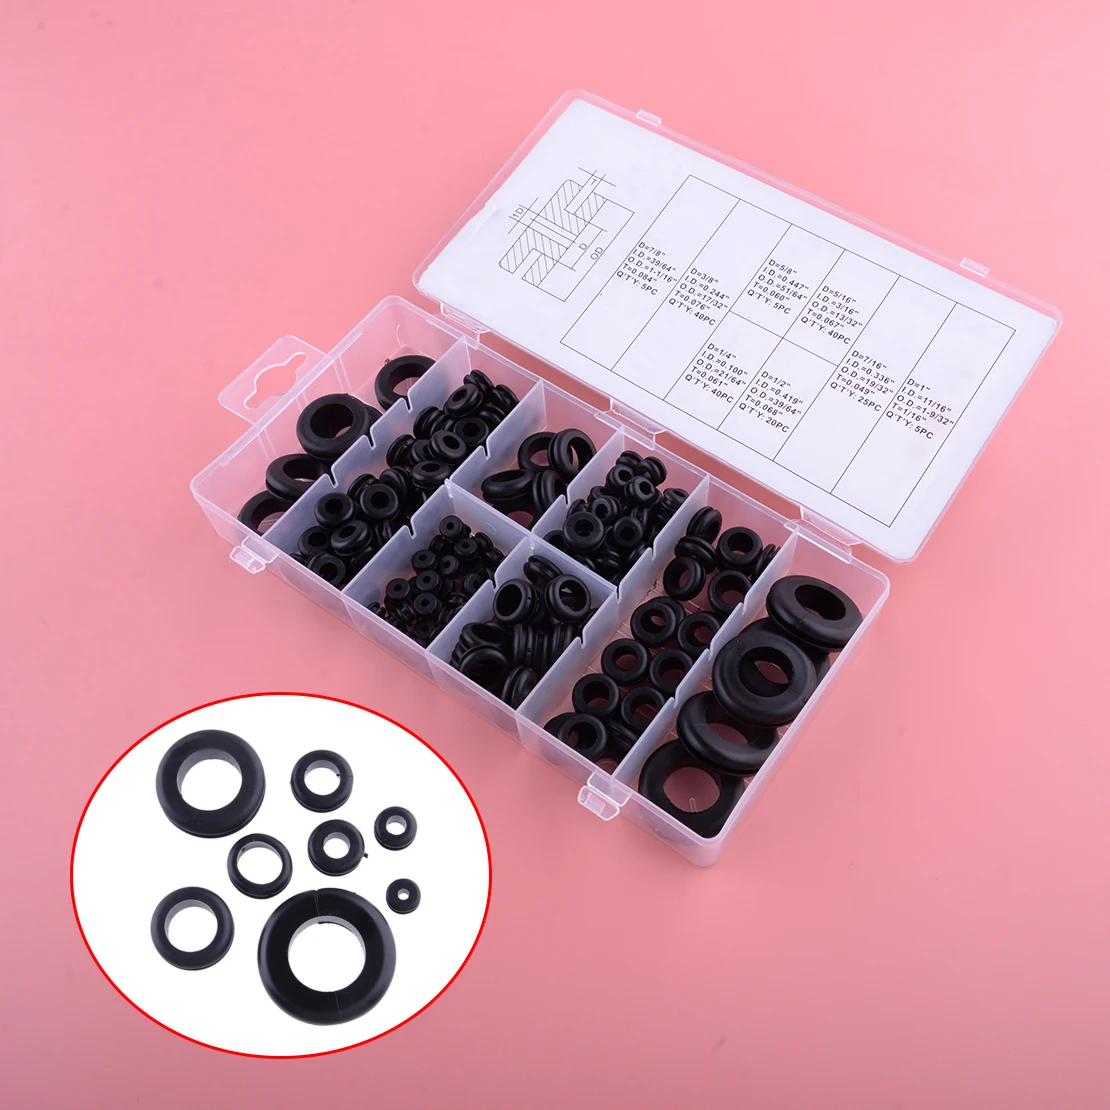 

180pcs/set Rubber Harness Cable Grommet Assortment Kit Firewall Hole Electrical Wiring Gasket